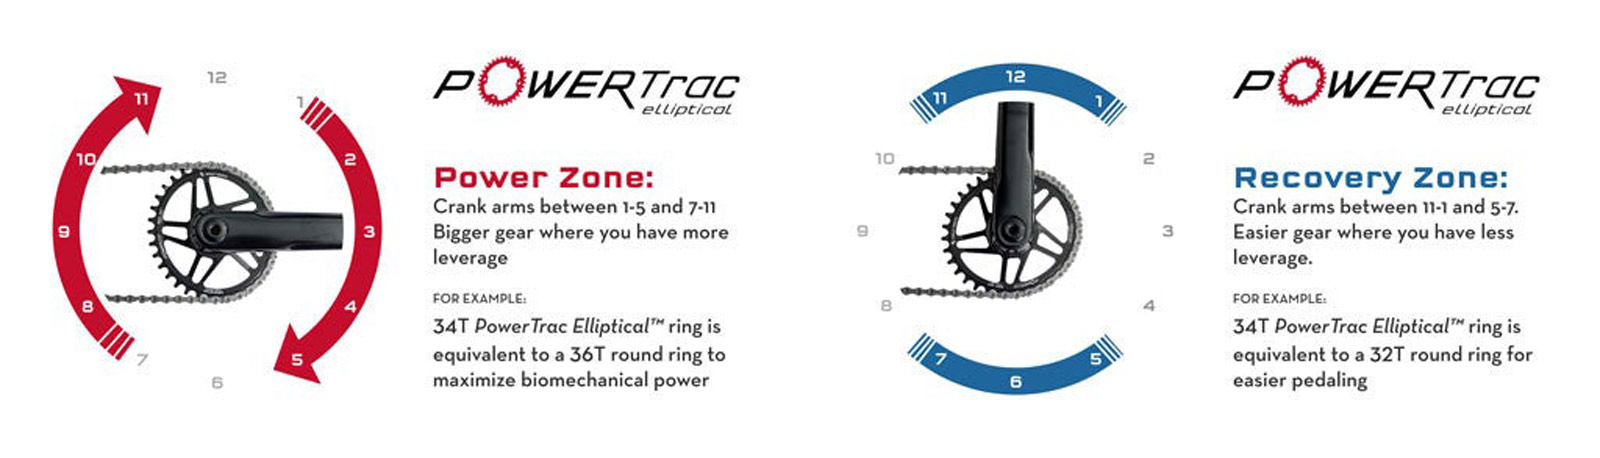 wolf tooth components power trac elliptical oval chainrings explained